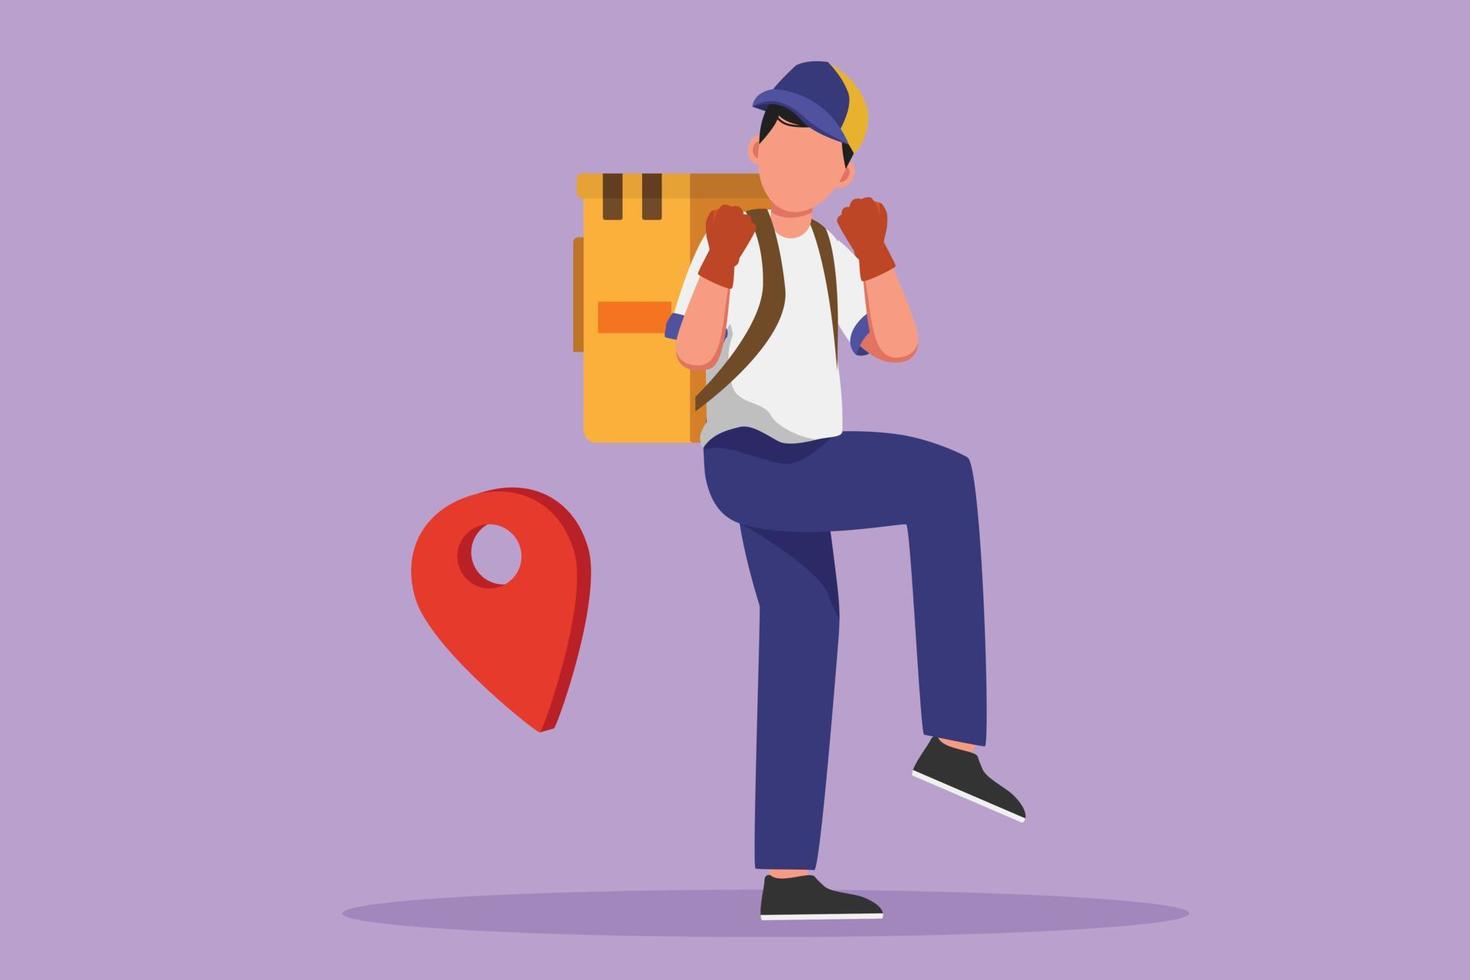 Graphic flat design drawing happy deliveryman standing with celebrate gesture and pin map icon. Carrying package box that customer has ordered to be delivered safely. Cartoon style vector illustration